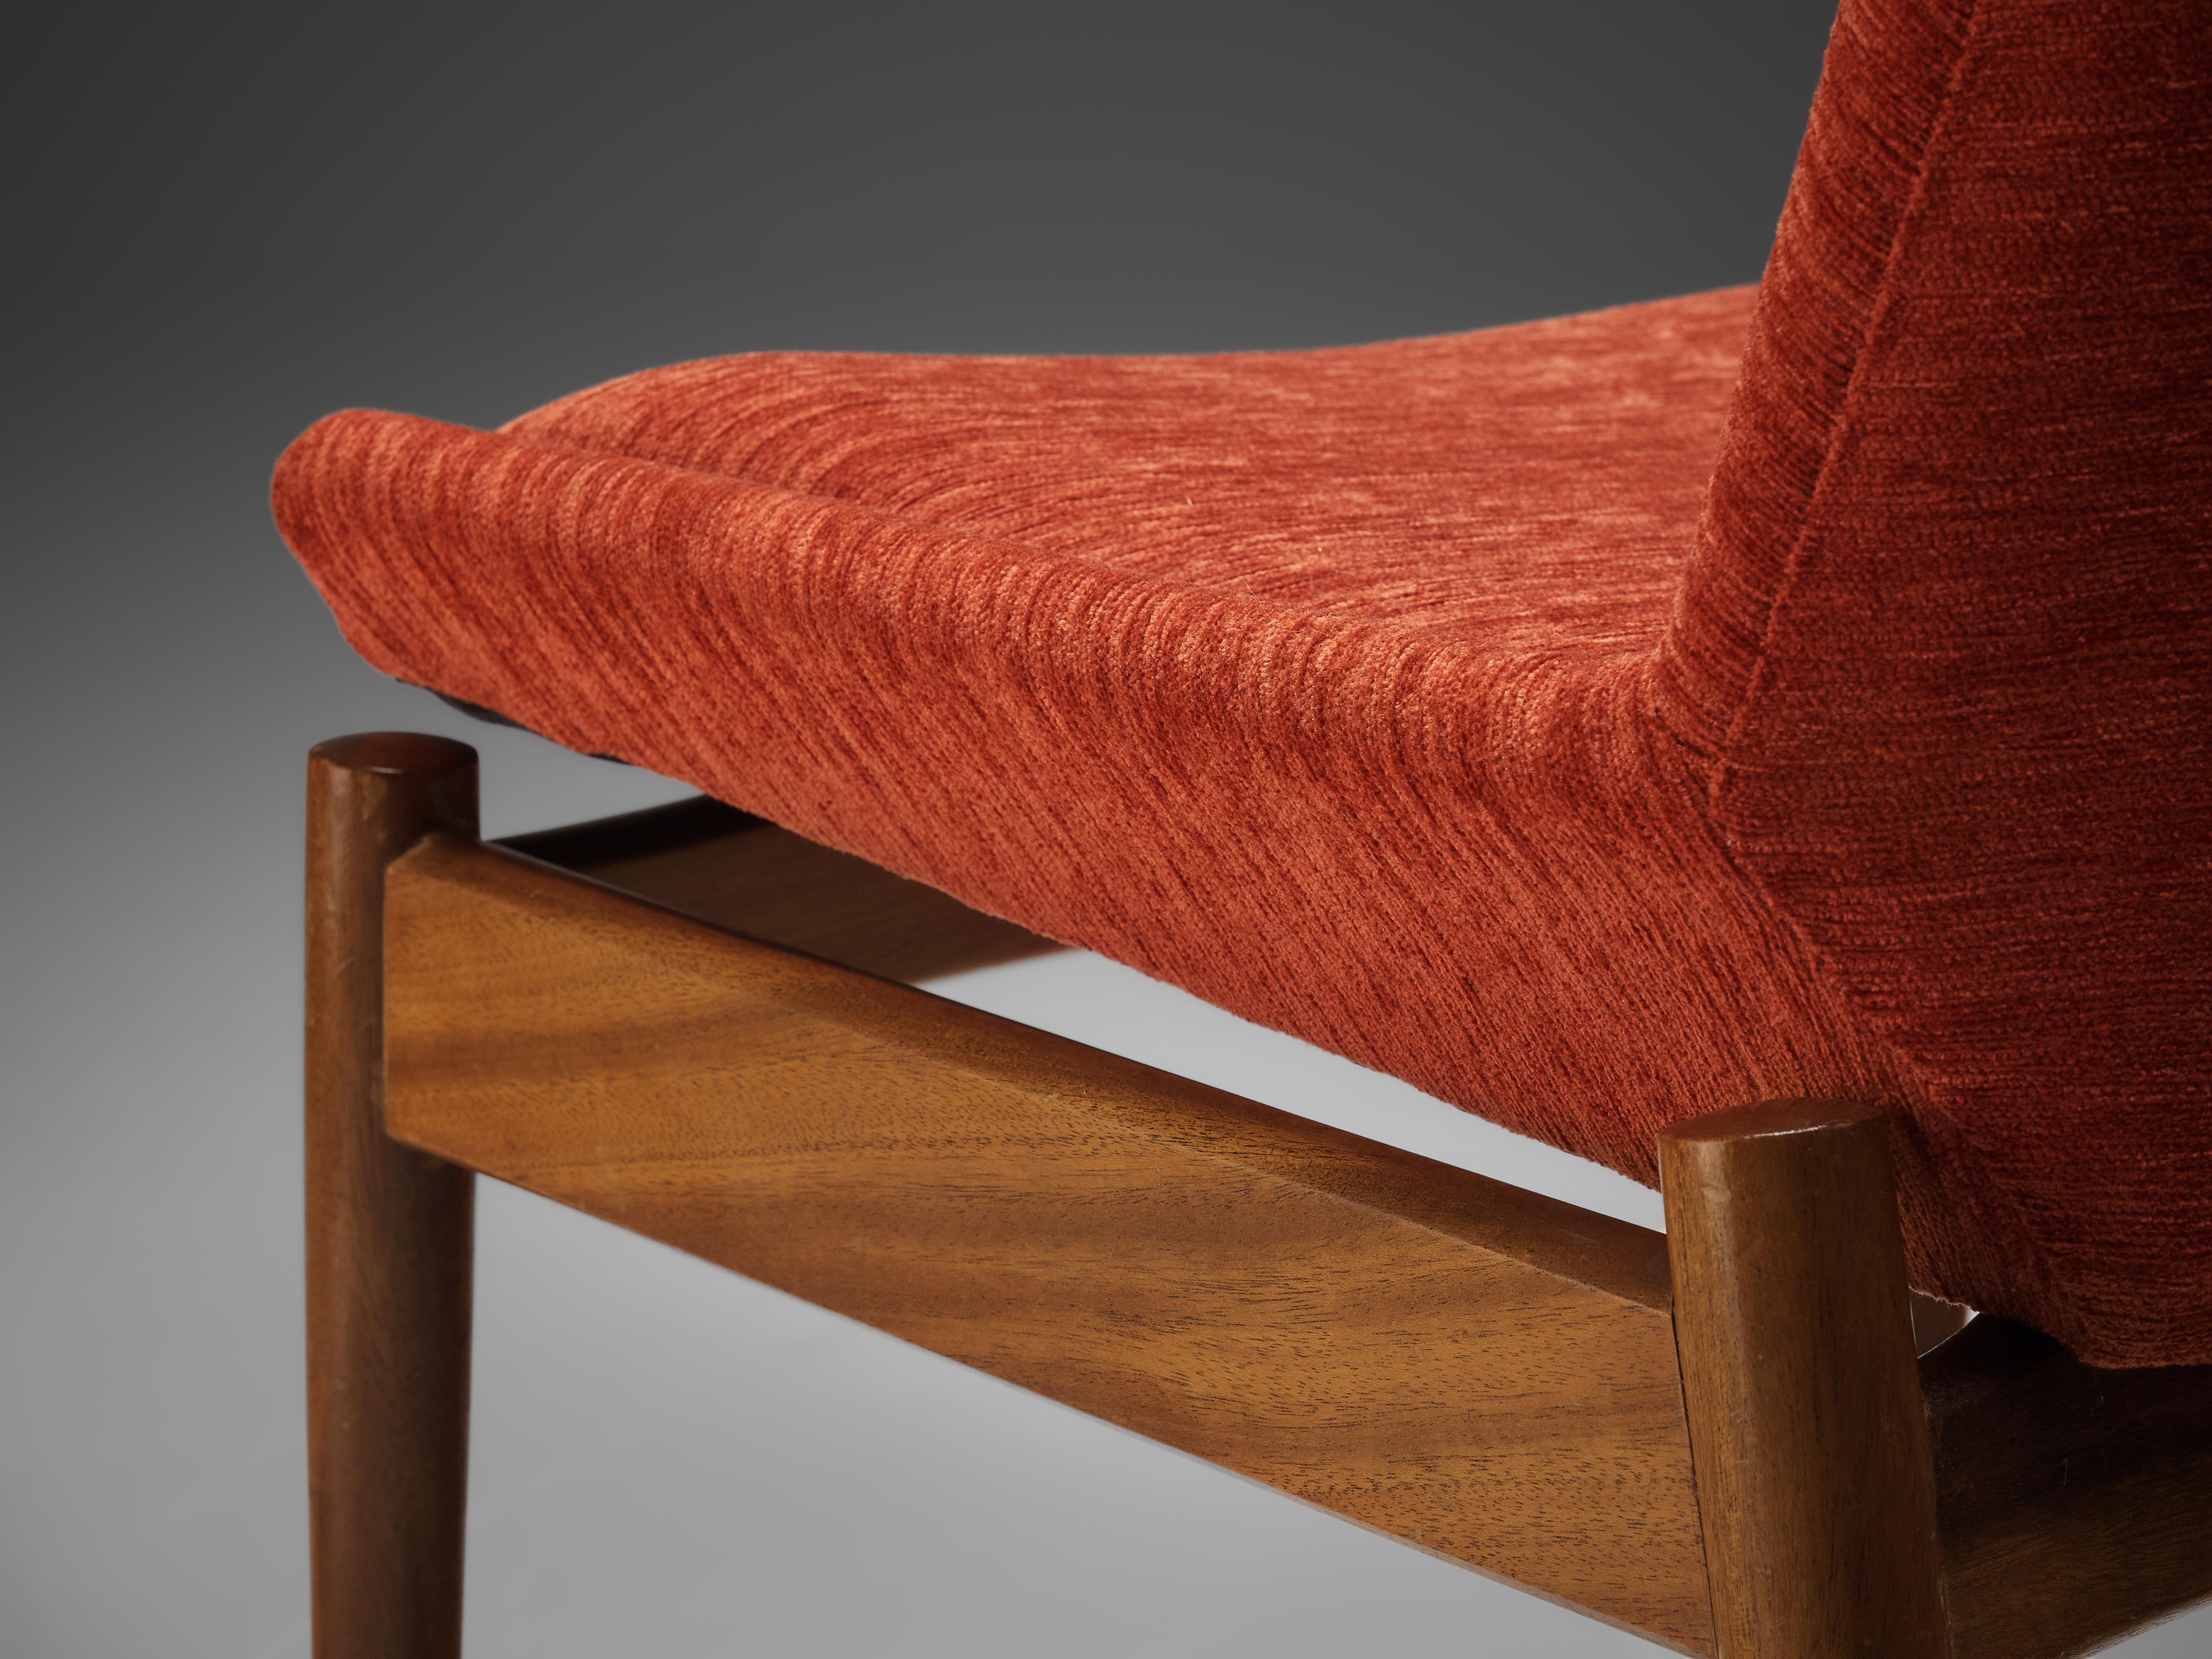 Mid-20th Century Scandinavian Dining Chairs in Teak and Red/Orange Cord Upholstery